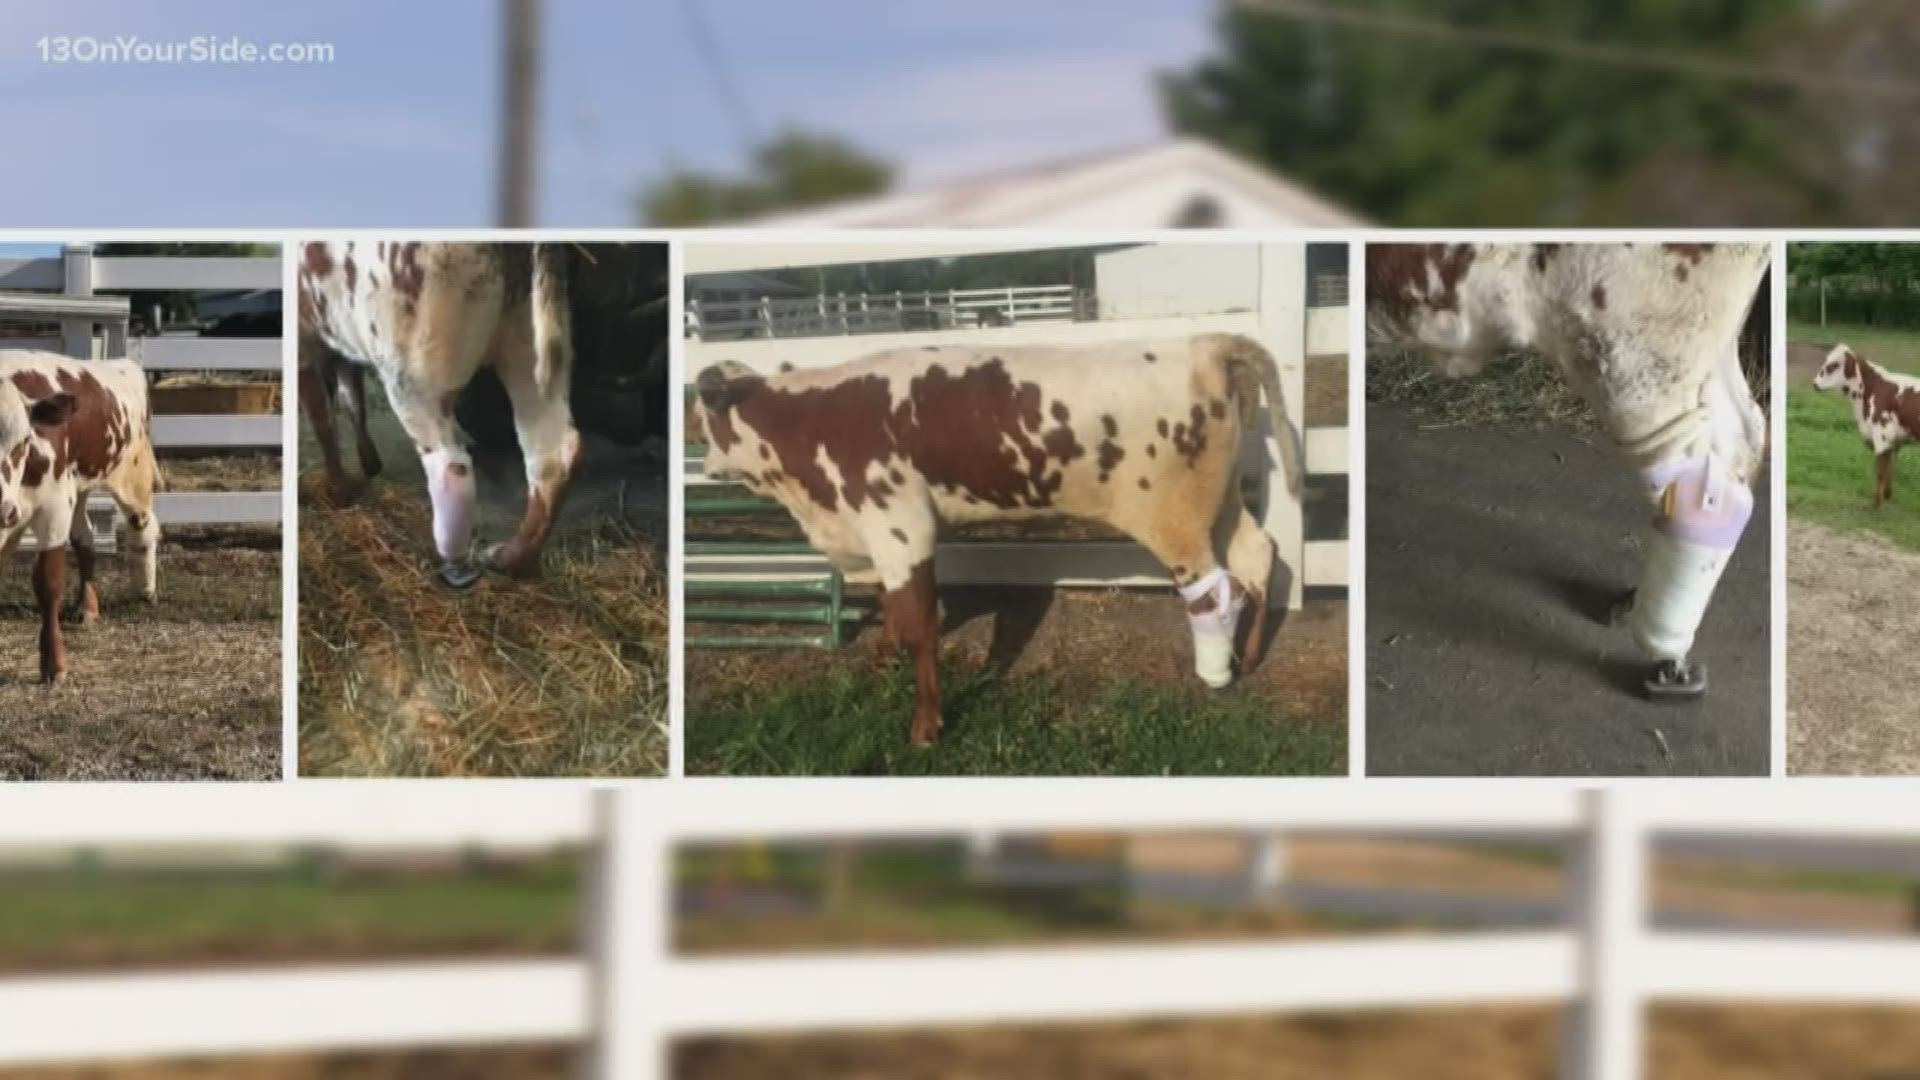 A cow in Charlotte, Michigan received a special prosthetic after her leg was amputated.